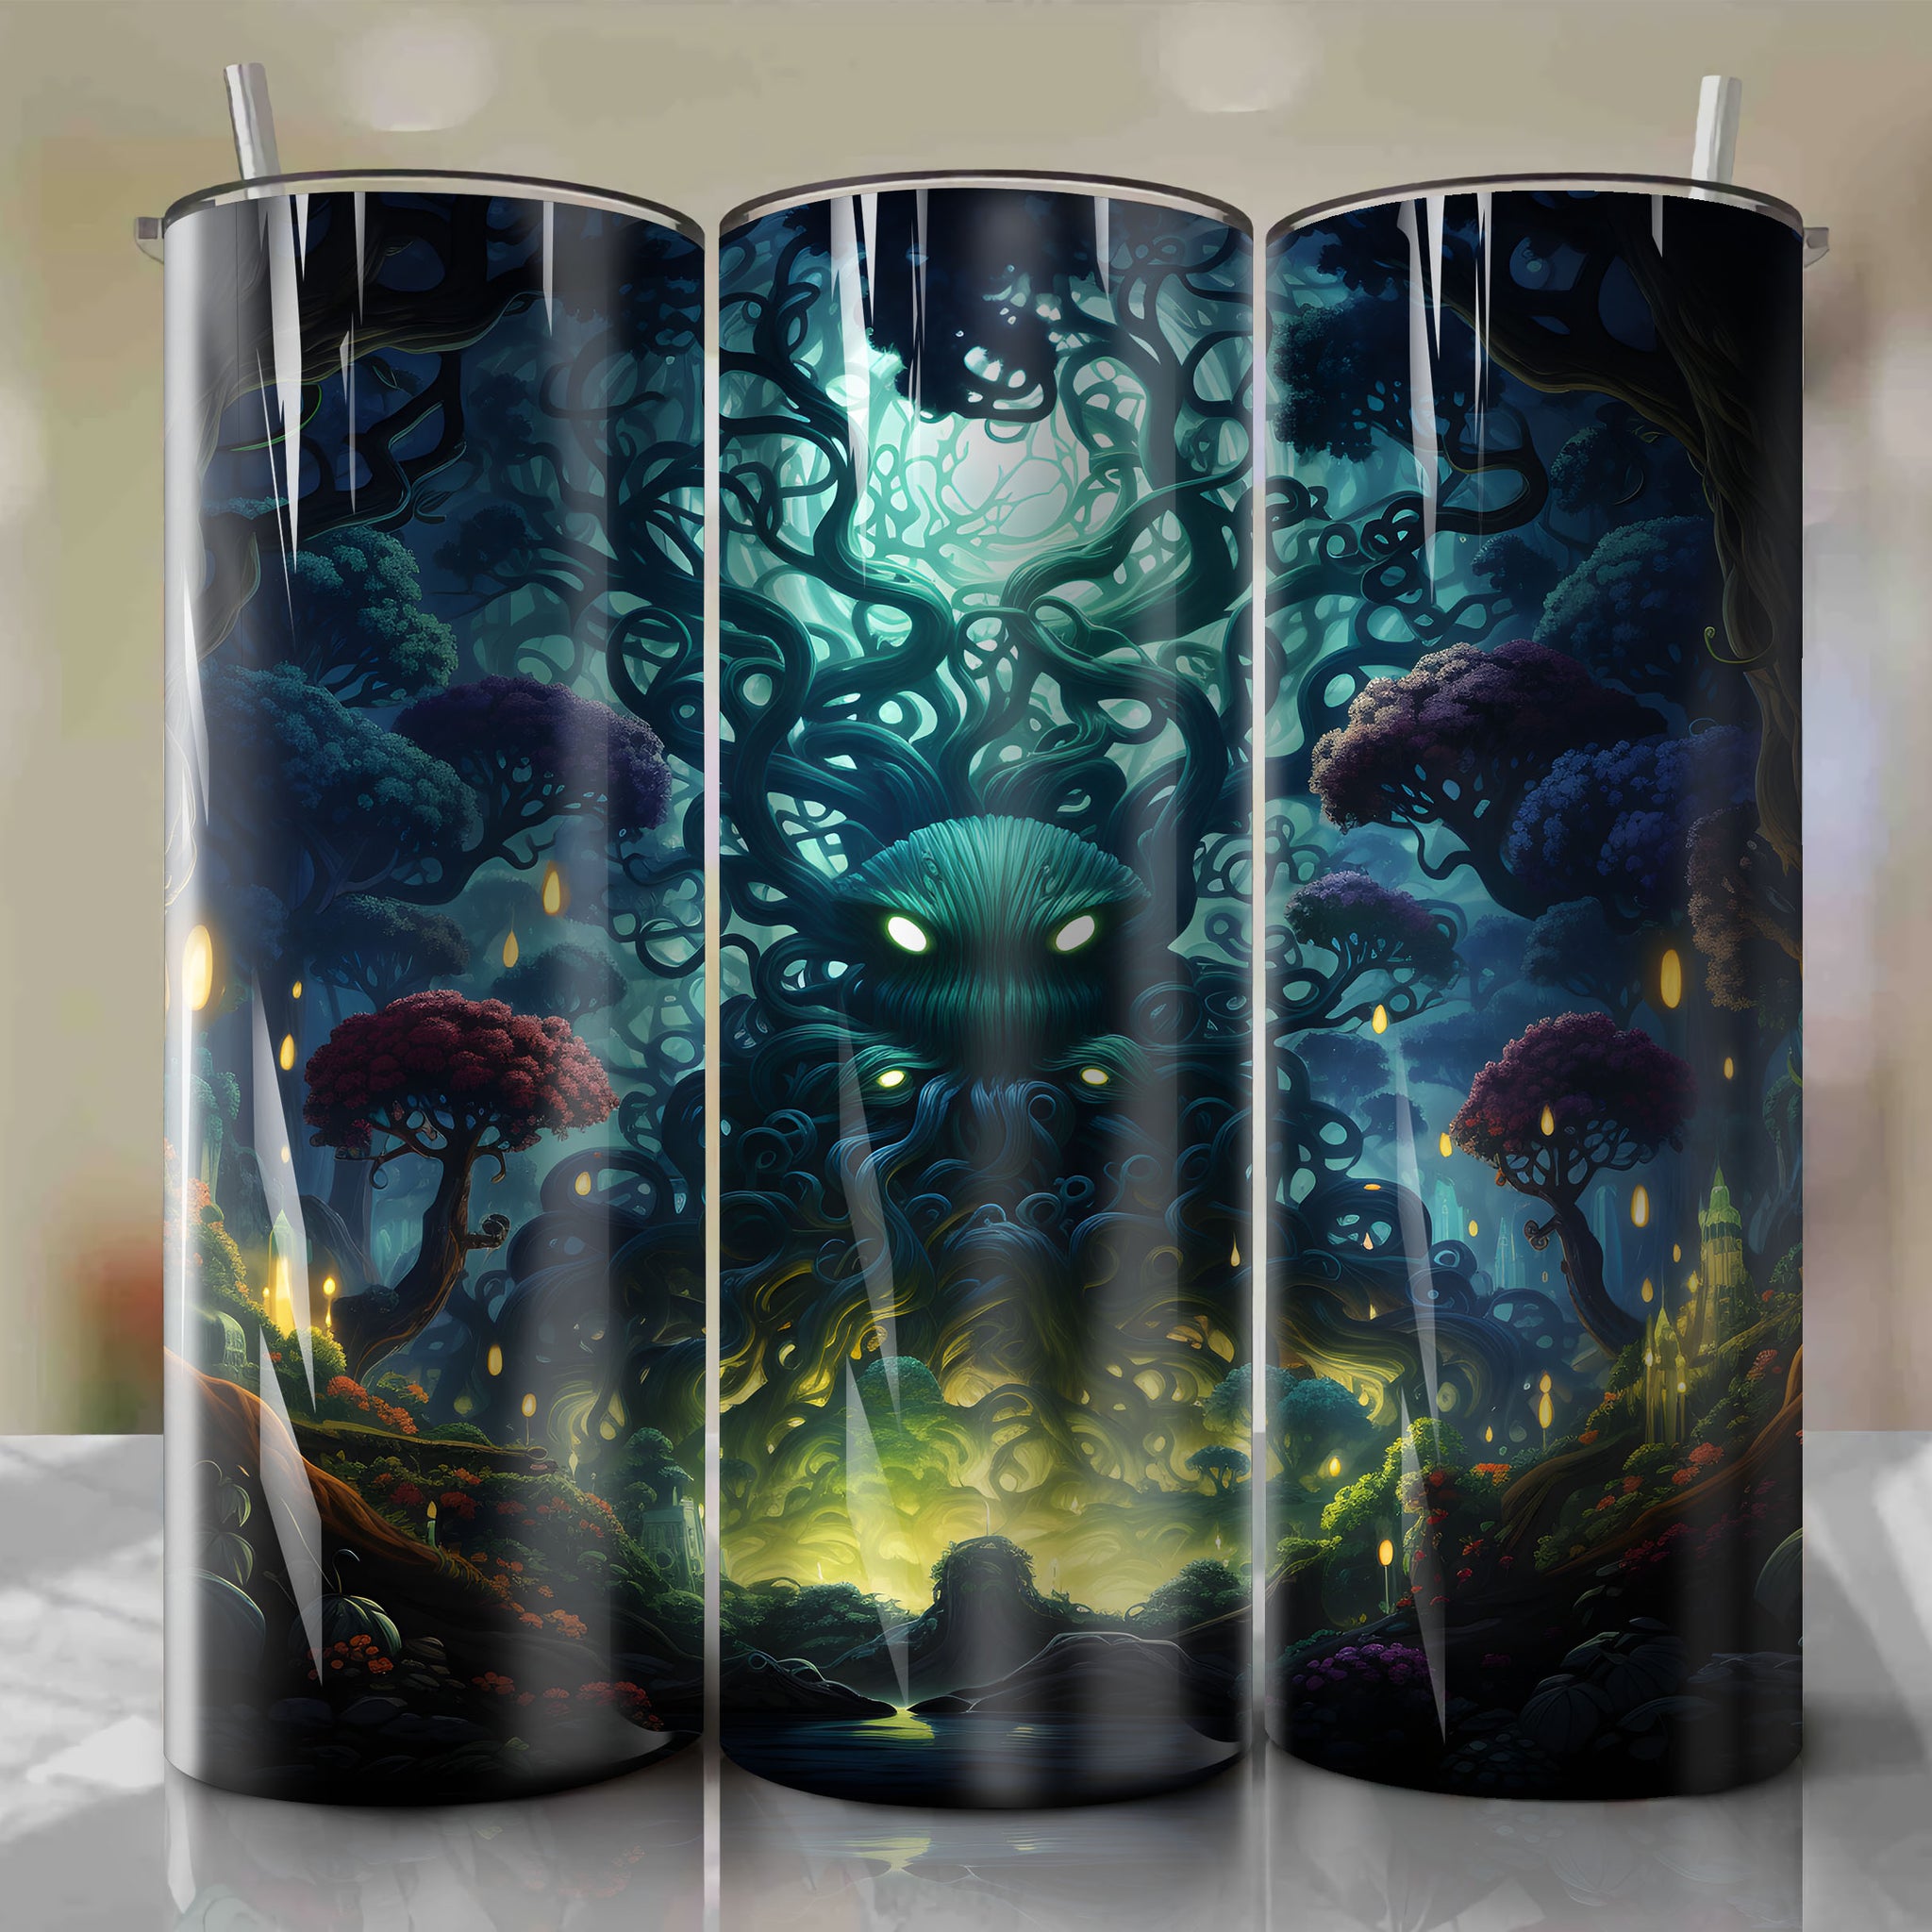 20 Oz Tumbler Wrap - A Vibrant and Enigmatic Forest Design for your Beverage
